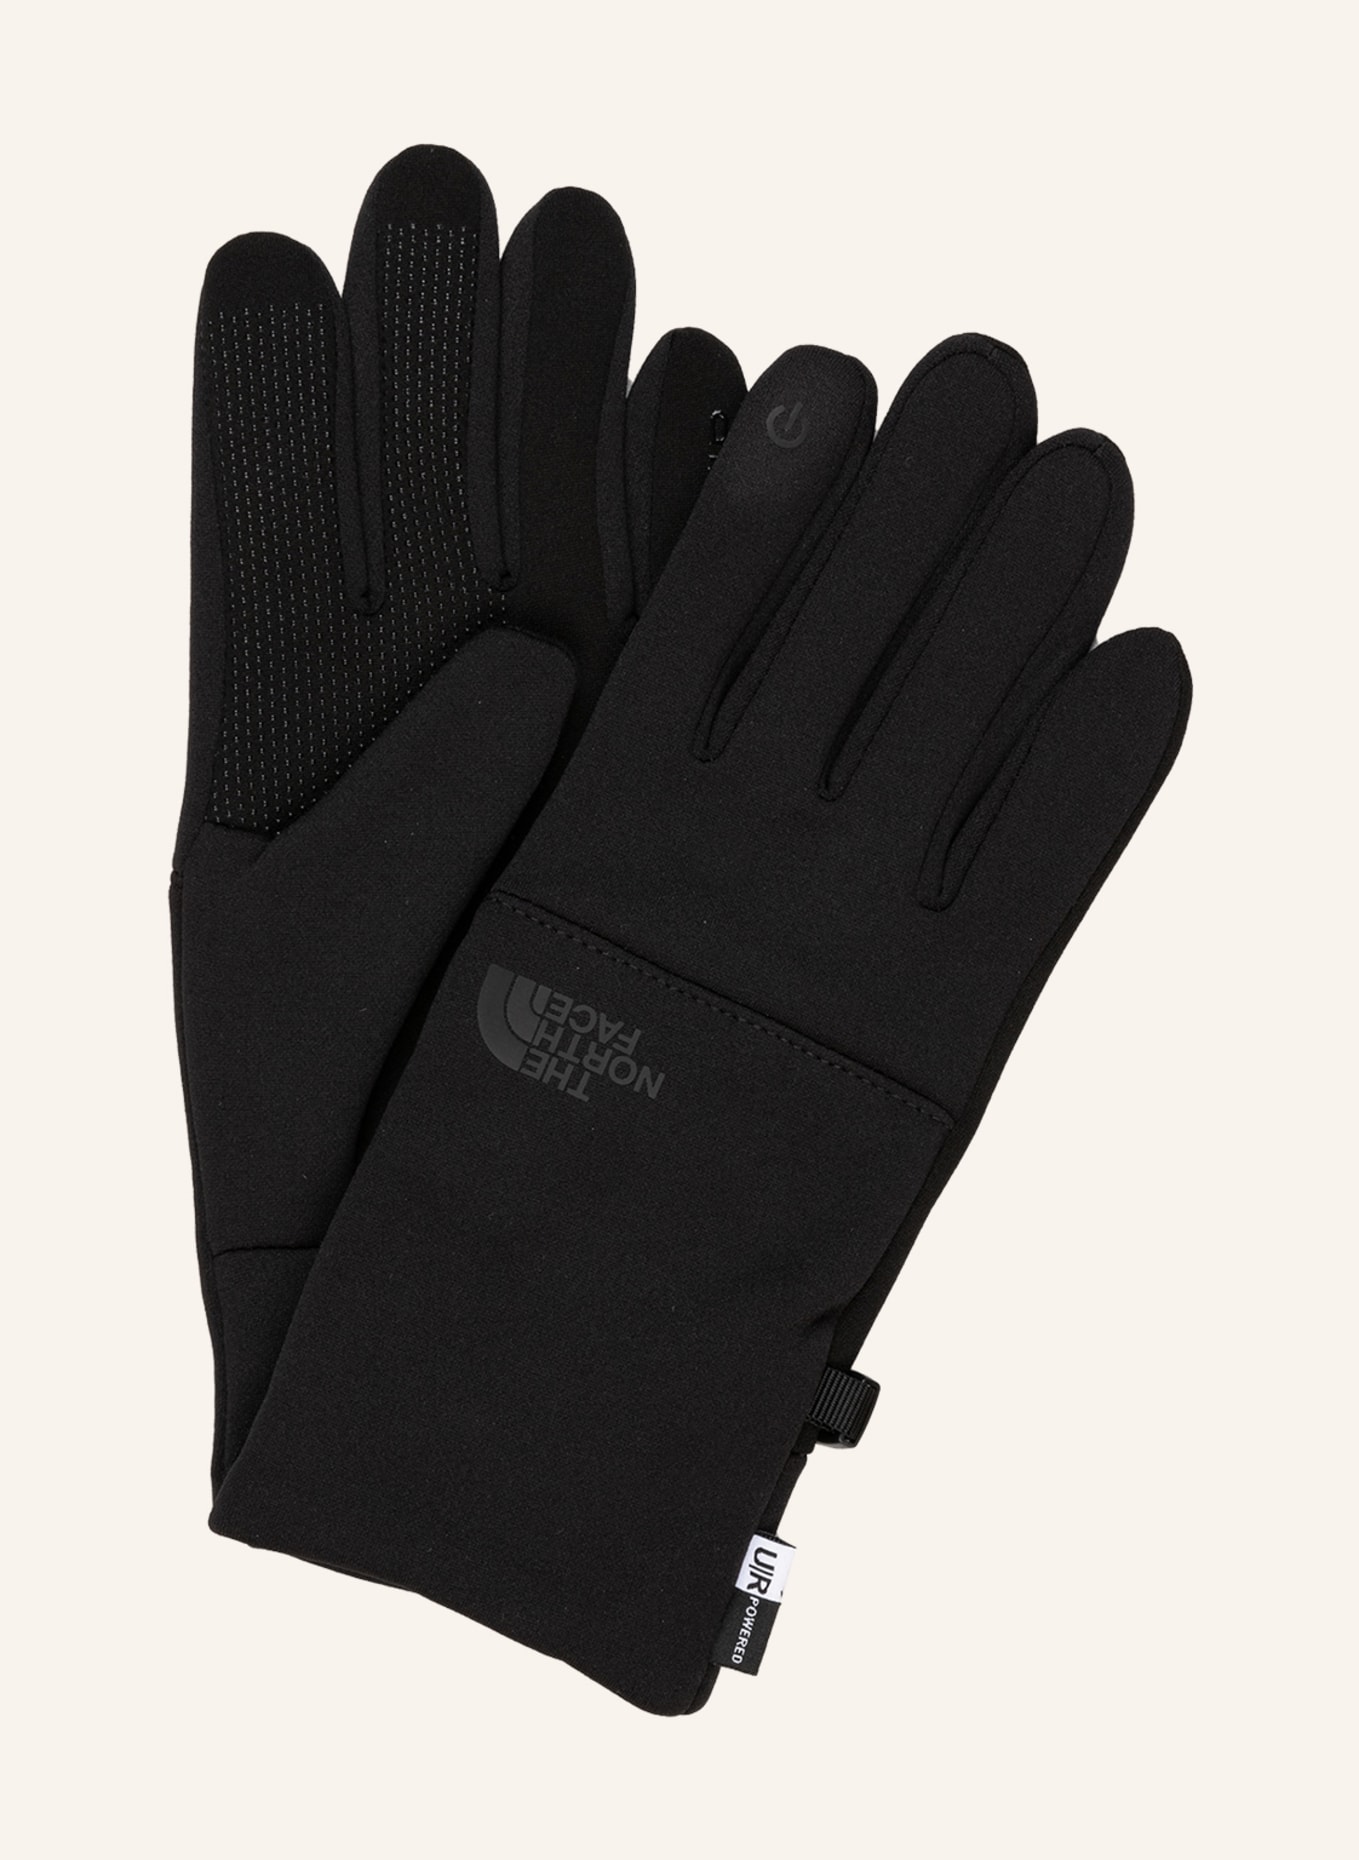 THE NORTH FACE Multisport black ETIP gloves function with touchscreen in